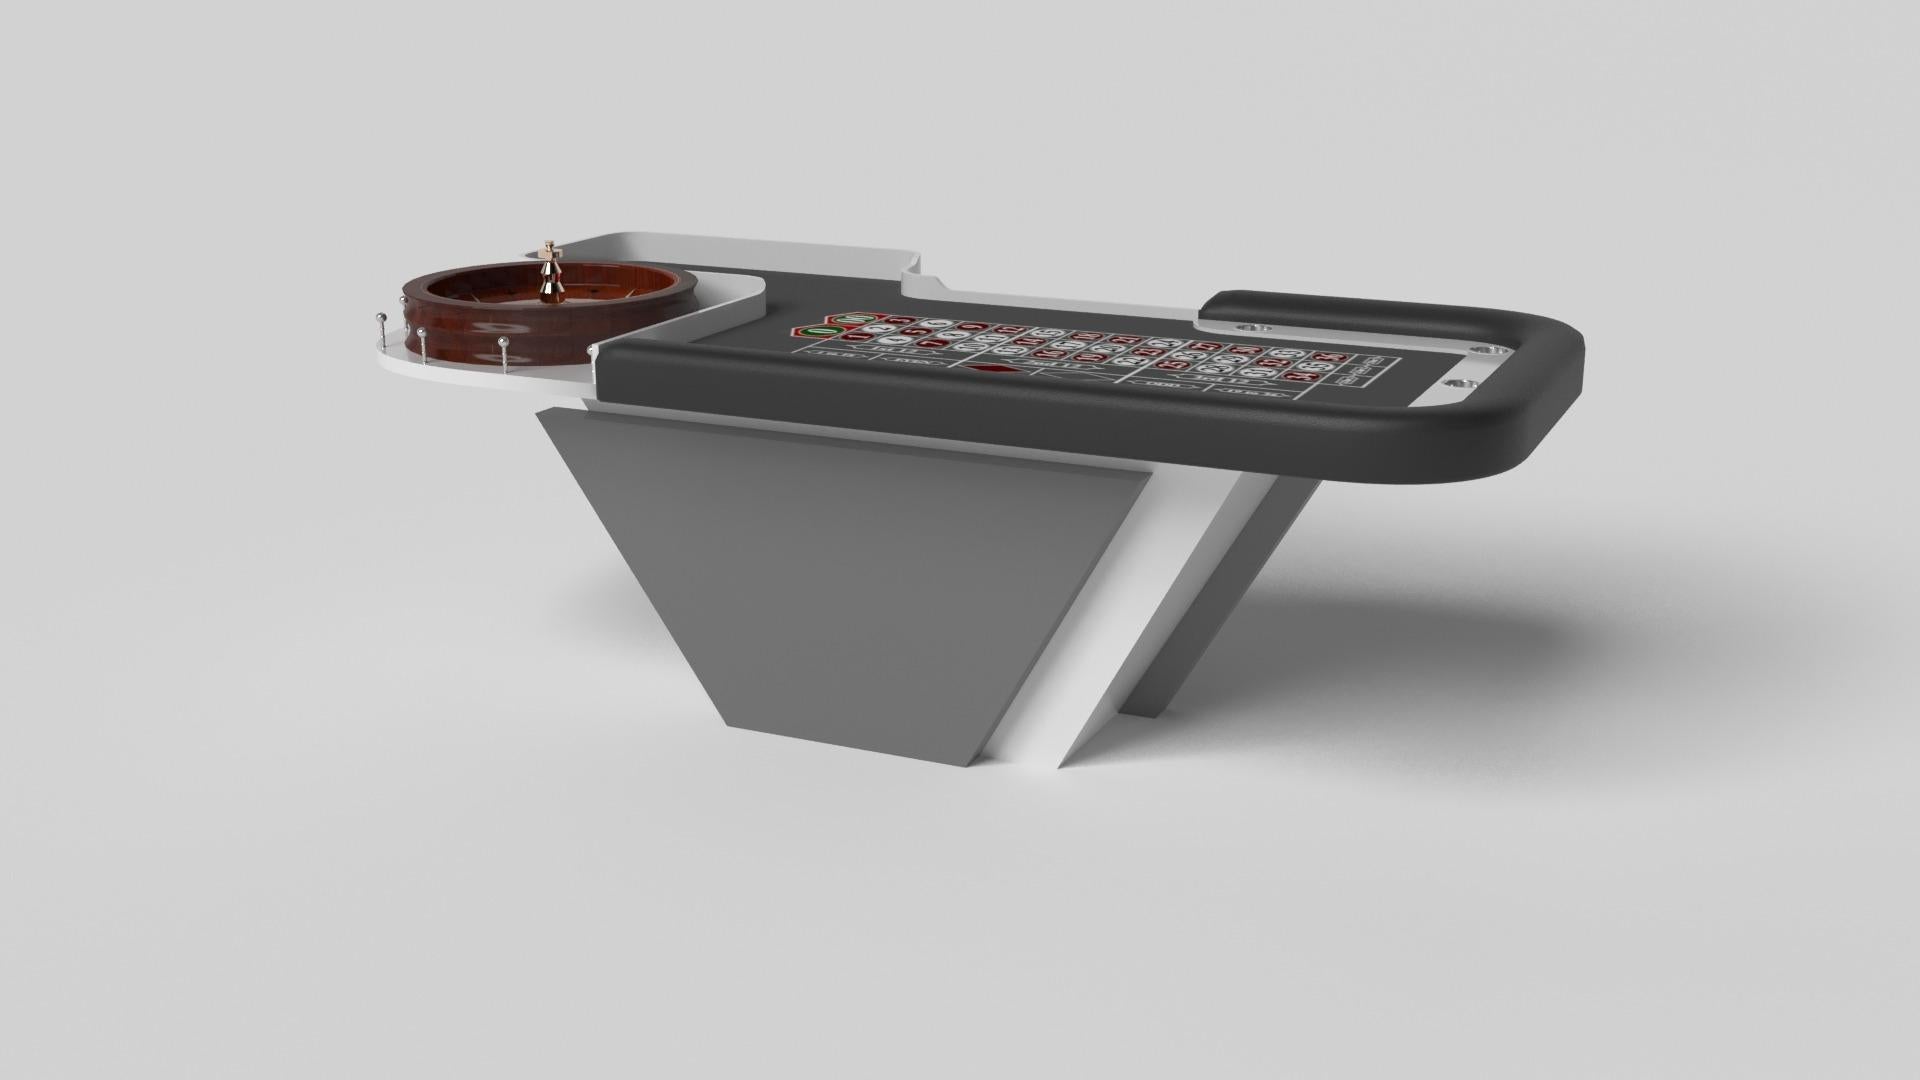 Handcrafted with clean lines, sharp angles, and a pyramid base, the Vogue roulette table in brushed aluminum strikes the perfect balance between sport-inspired style and contemporary design. Timeless in its appeal and revered for its practicality